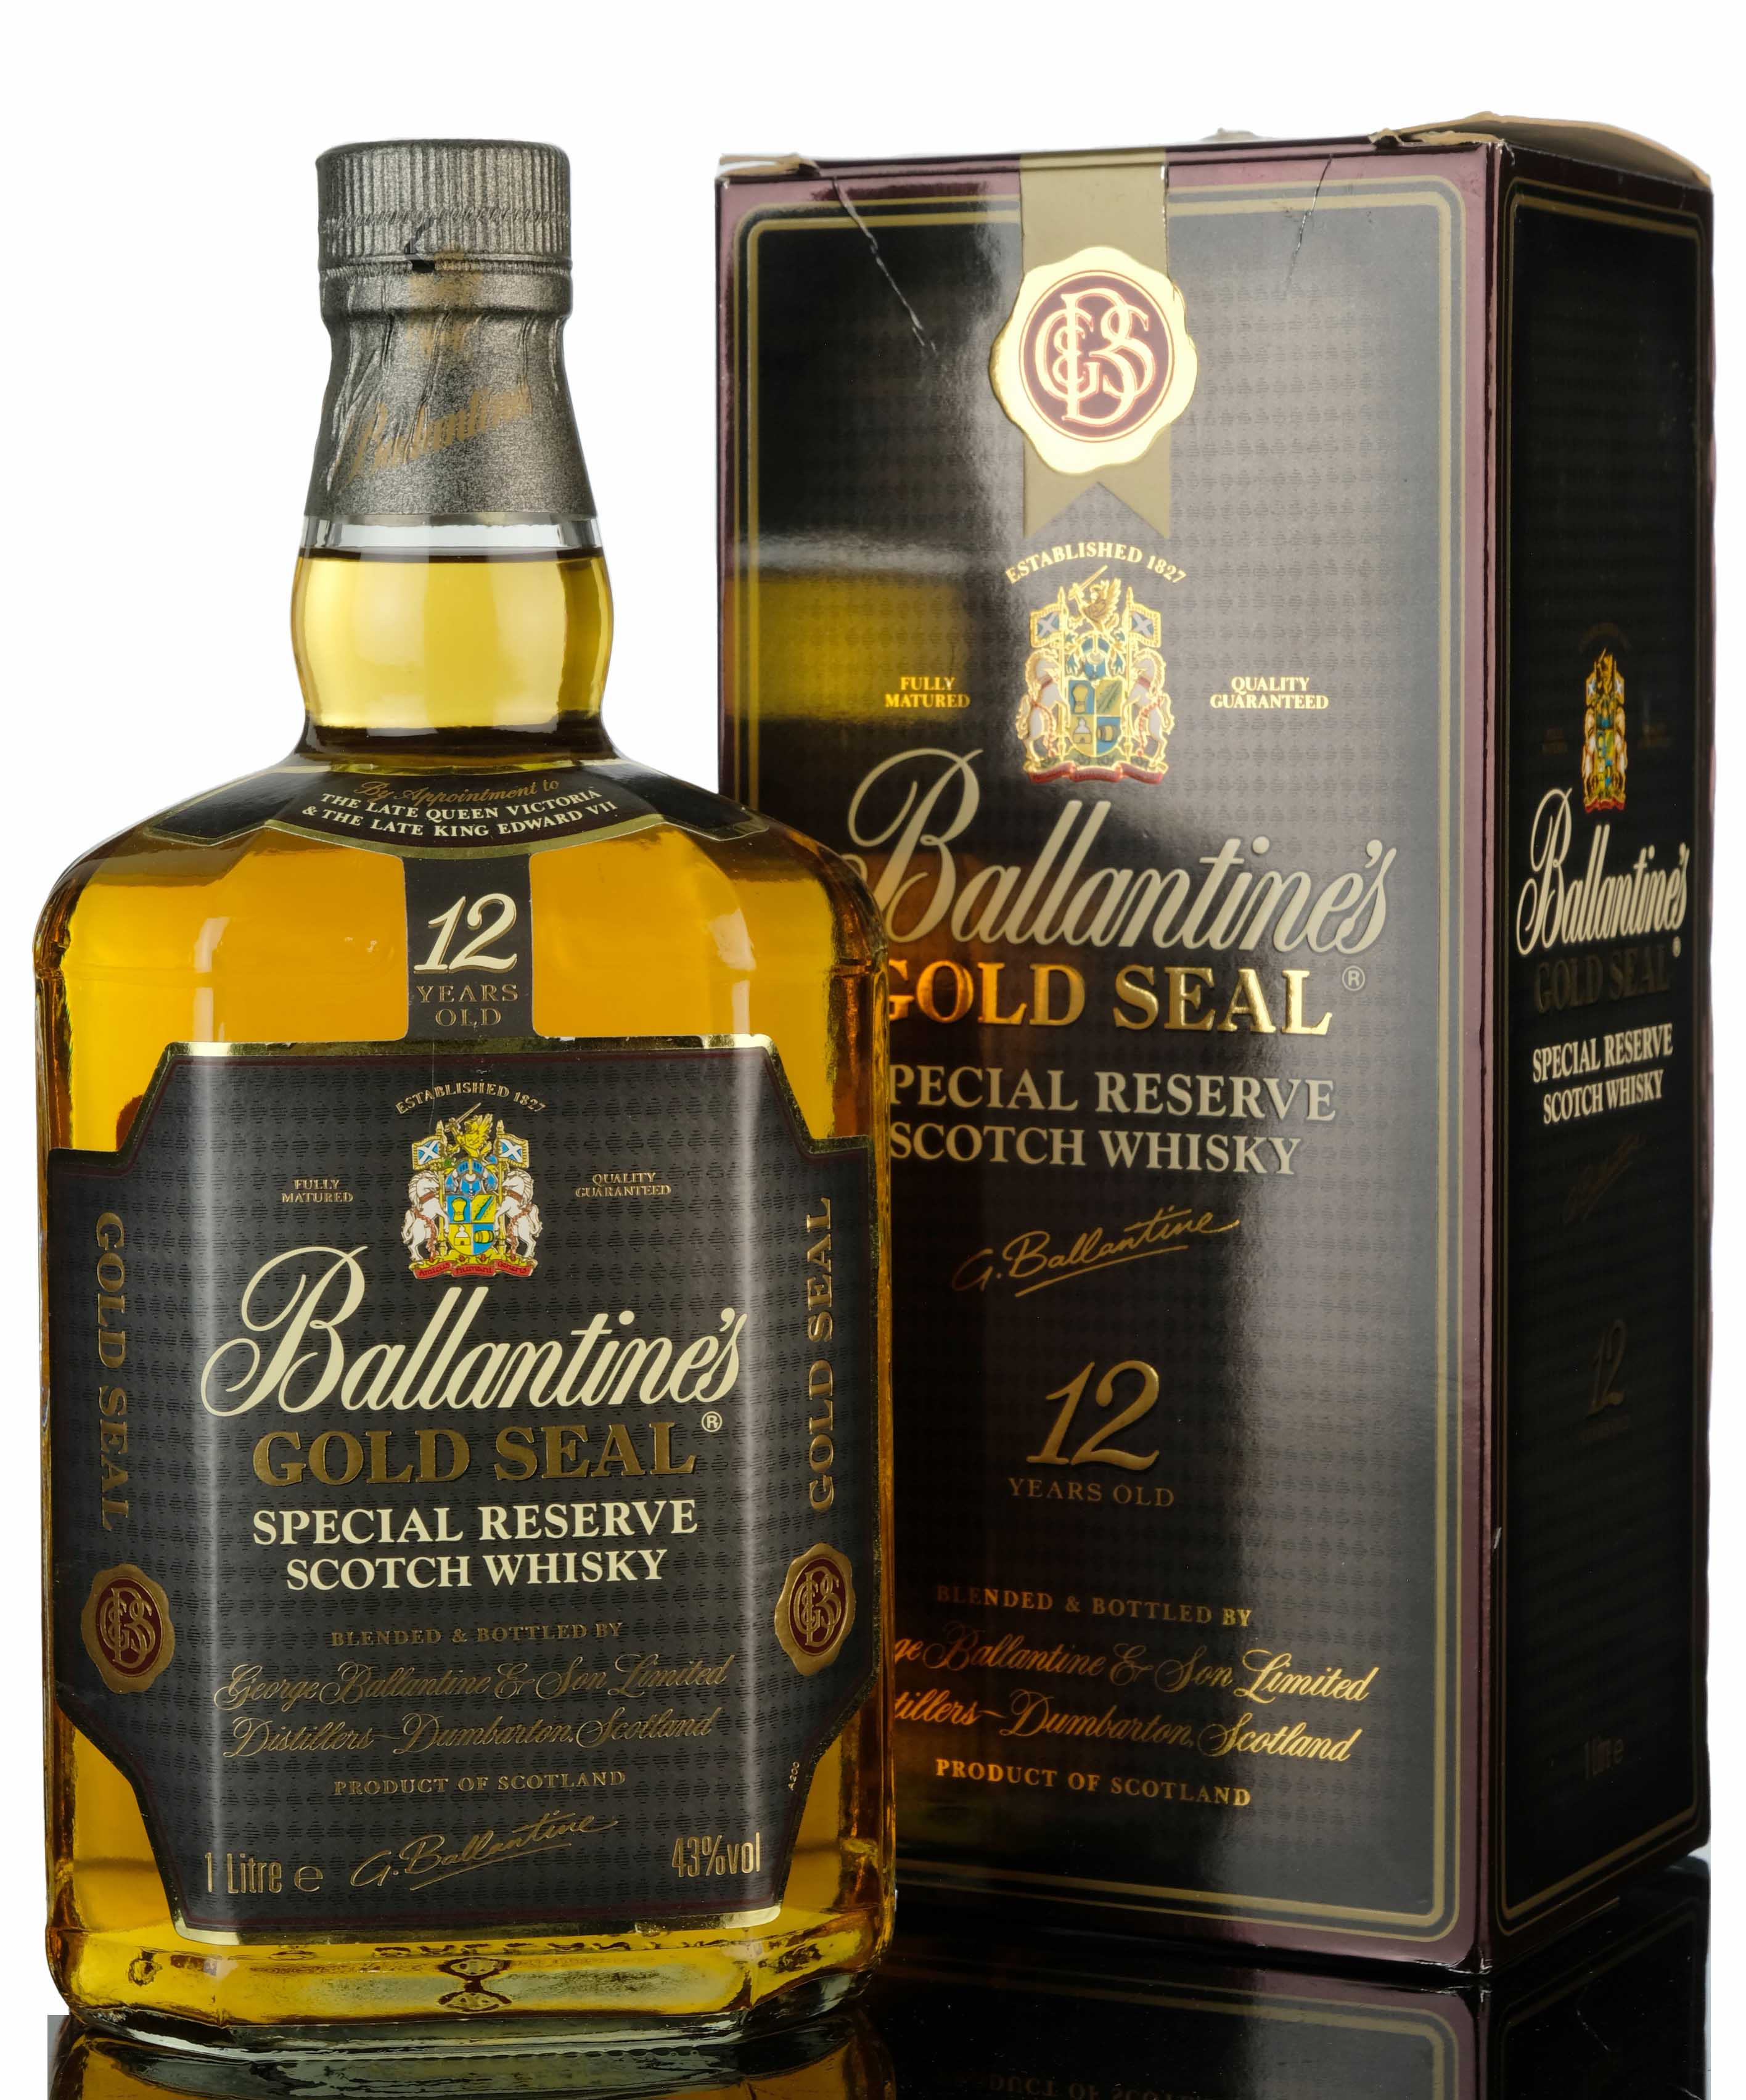 Ballantines 12 Year Old - Gold Seal - 1 Litre